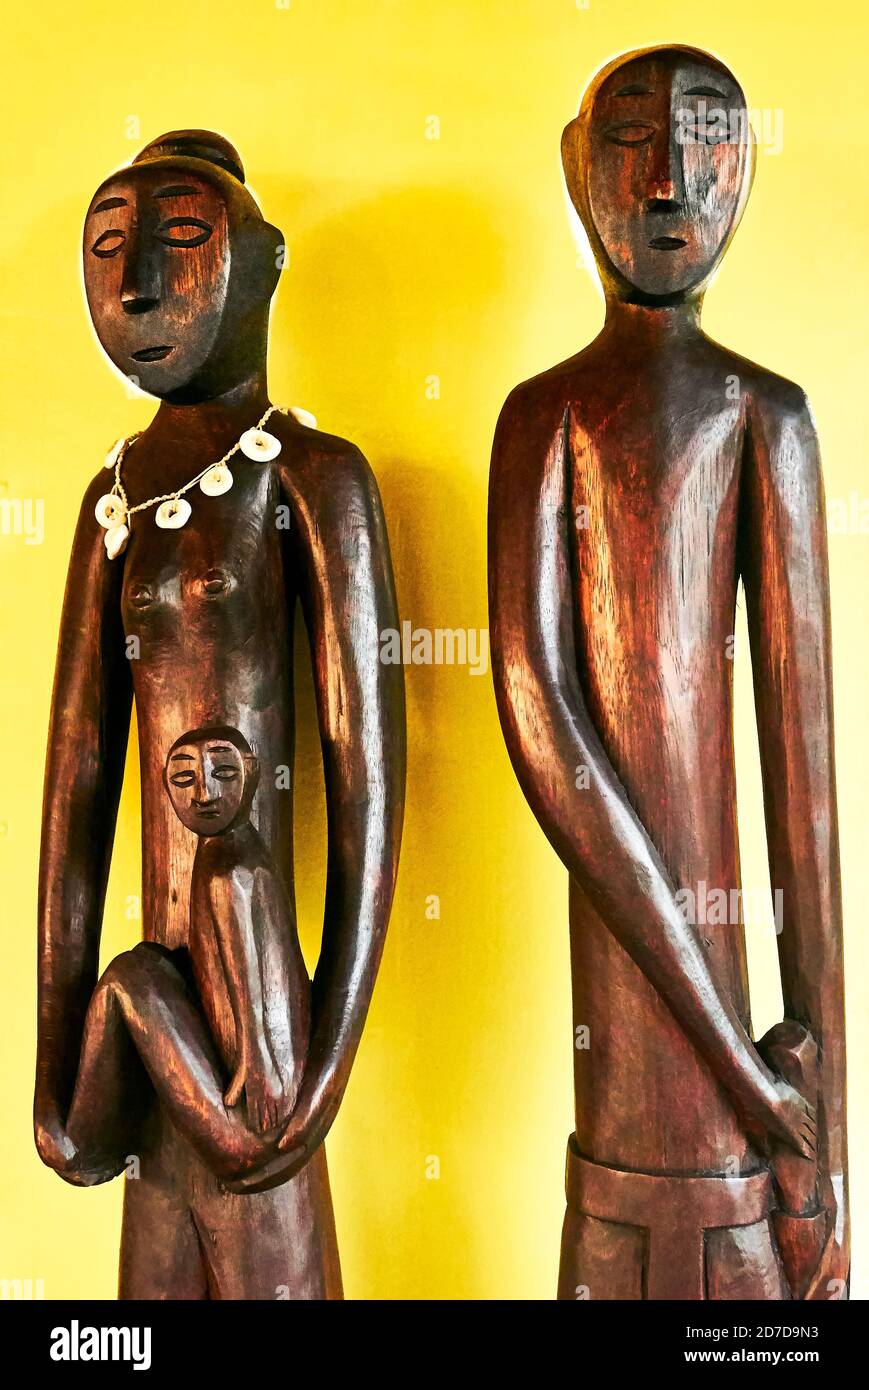 A mother holding her child next to the father as wooden carved statues standing in front of a yellow background, Puerto Princesa, Palawan, Philippines Stock Photo